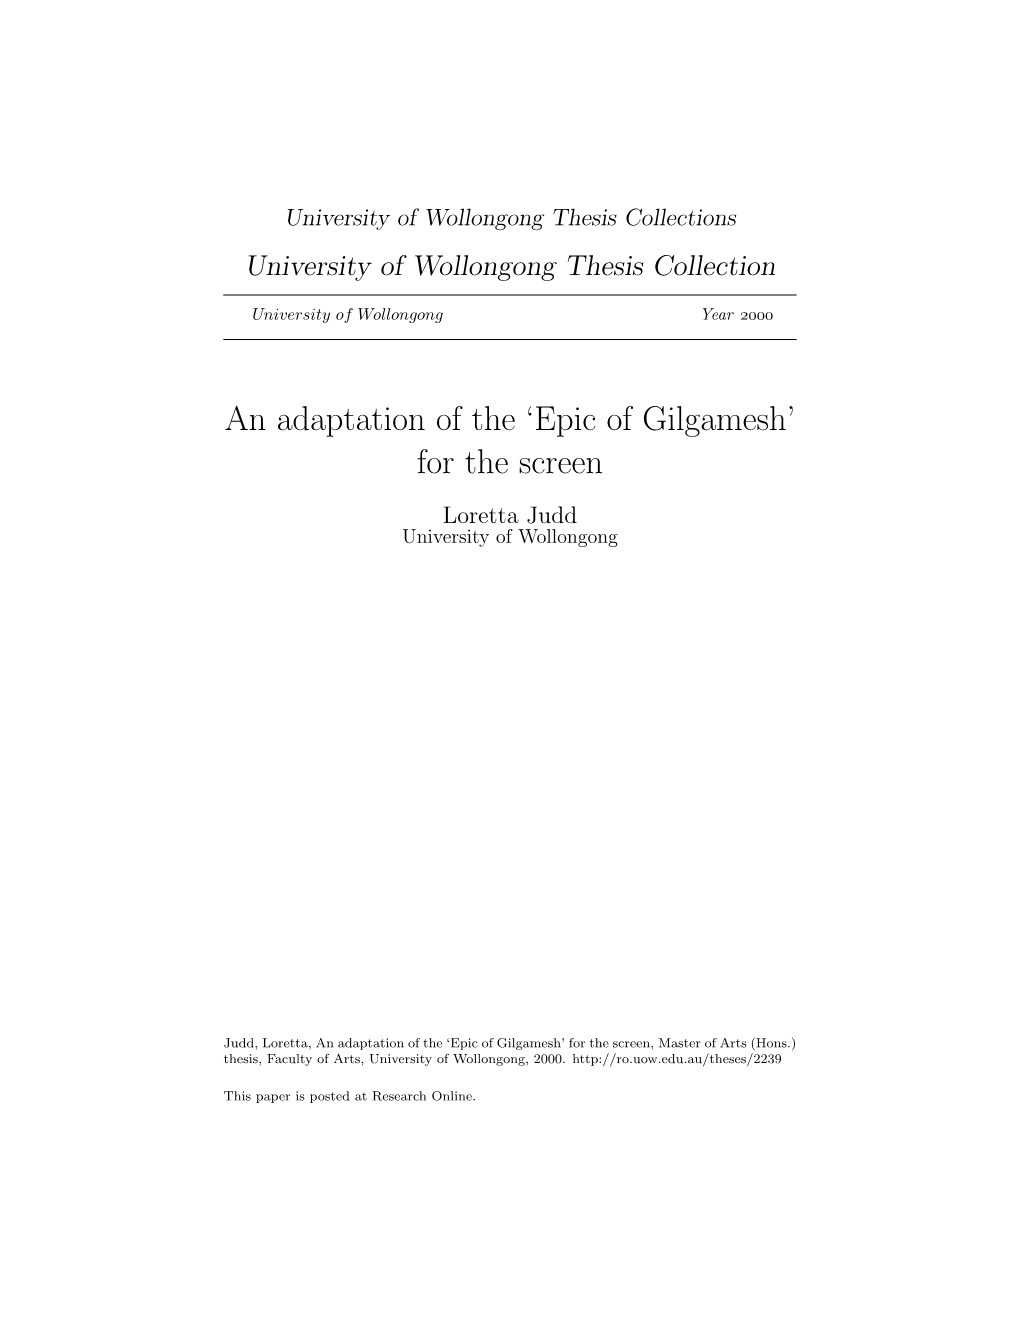 An Adaptation of the 'Epic of Gilgamesh'